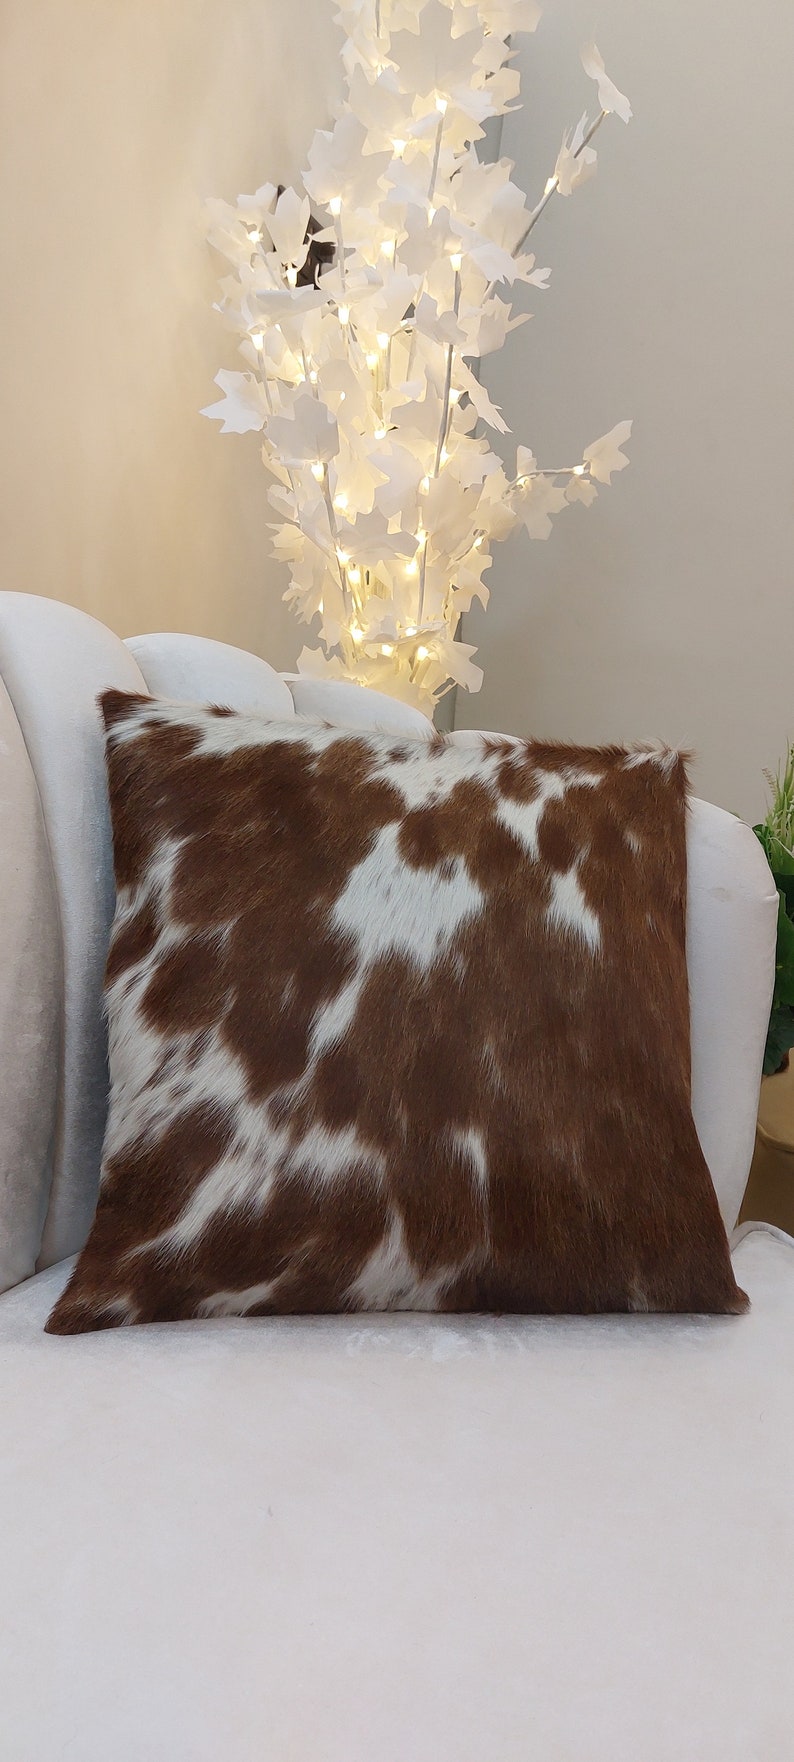 Cowhide Pillow Cover Brown And White Cowhide Cushion Natural Hair On Throw Cushion Covers Genuine Cow Hide Real Original Skin Leather Pillow image 8